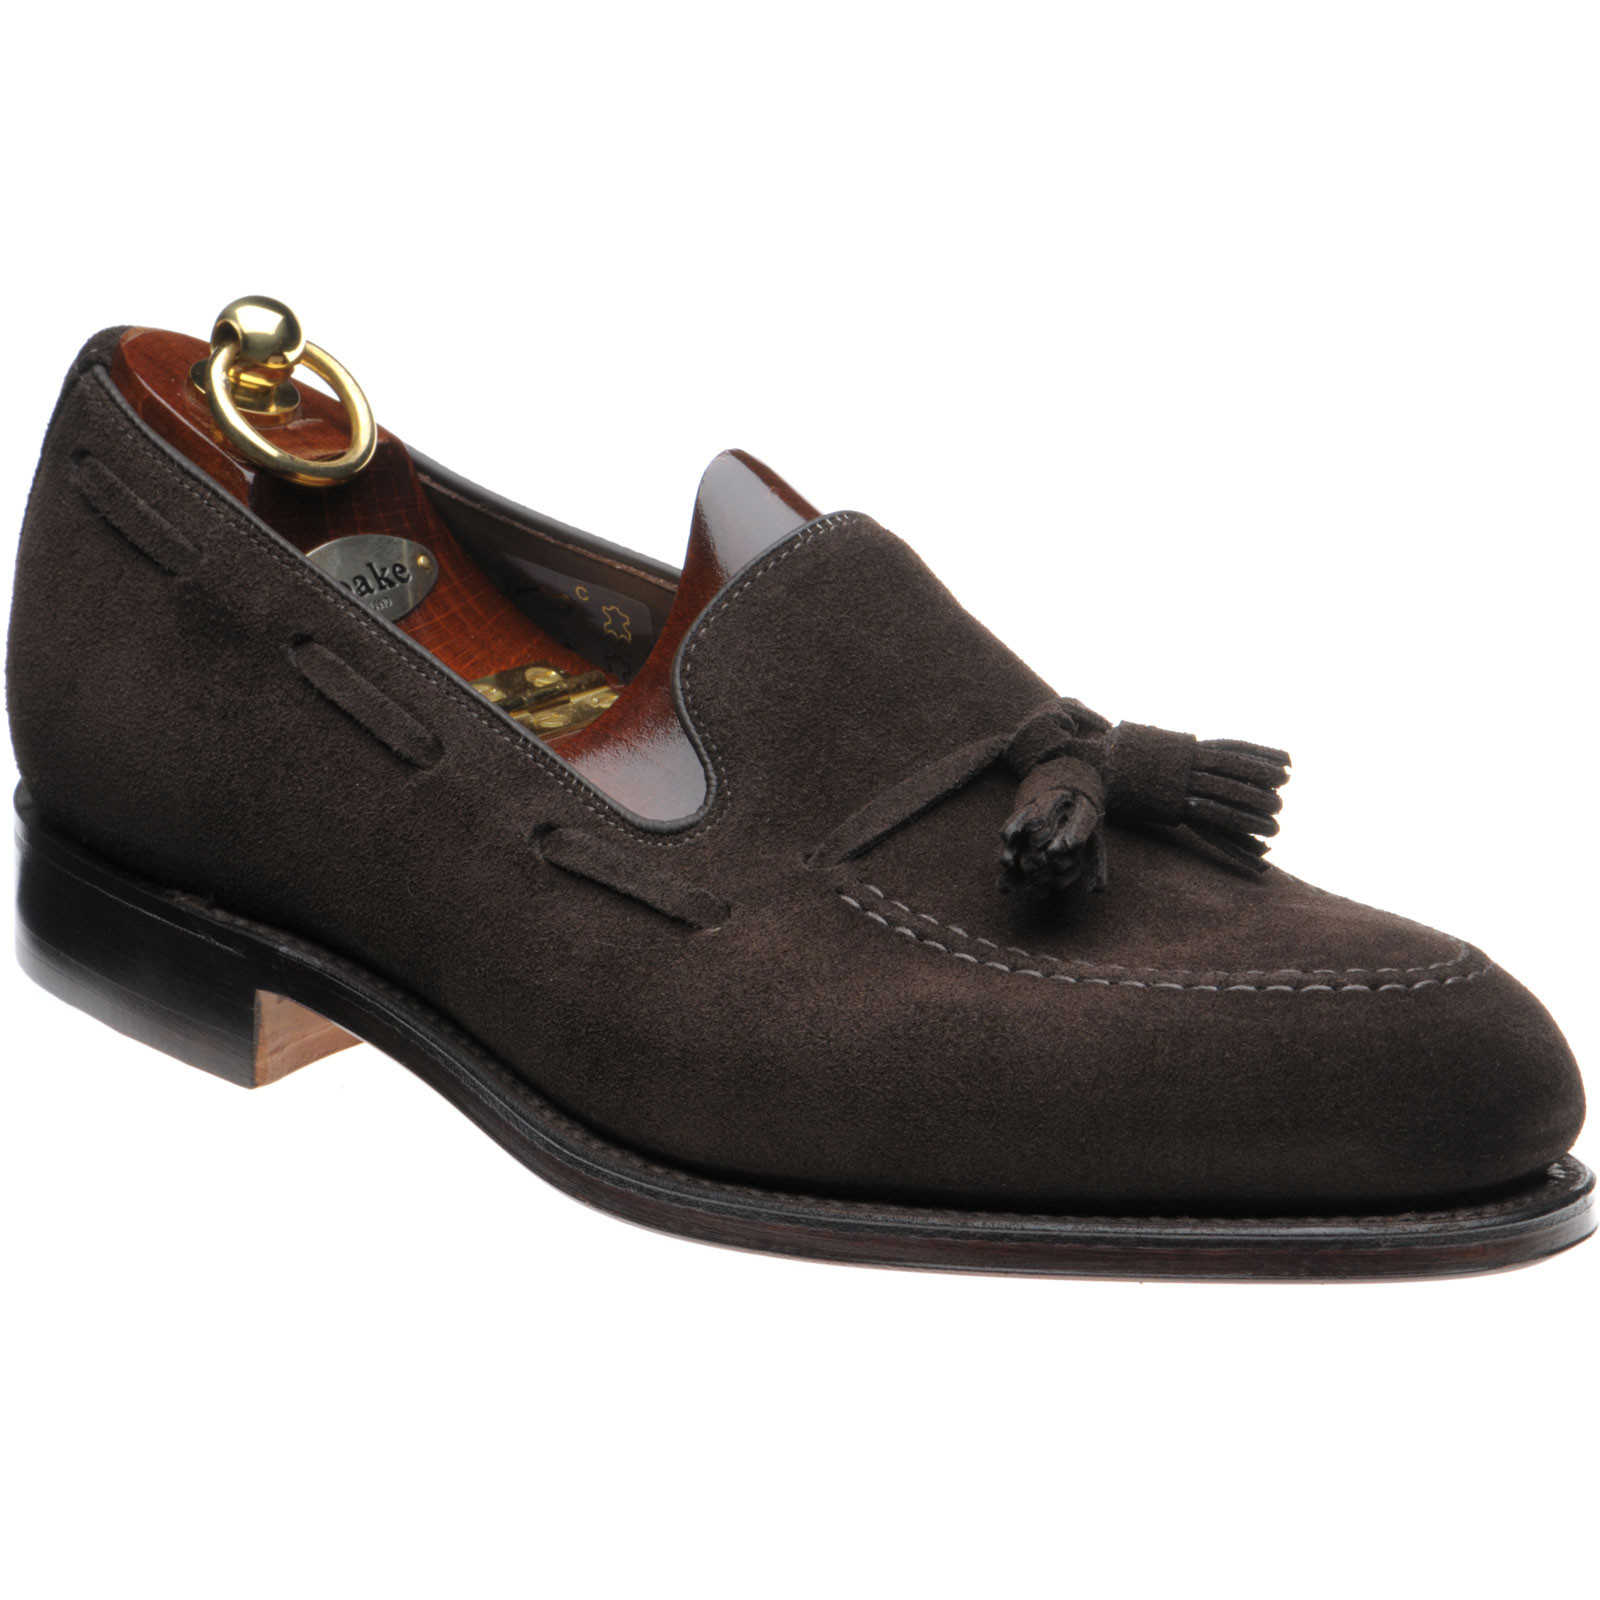 Loake shoes | Loake 1880 Classic | Russell tasselled loafers in Choc ...